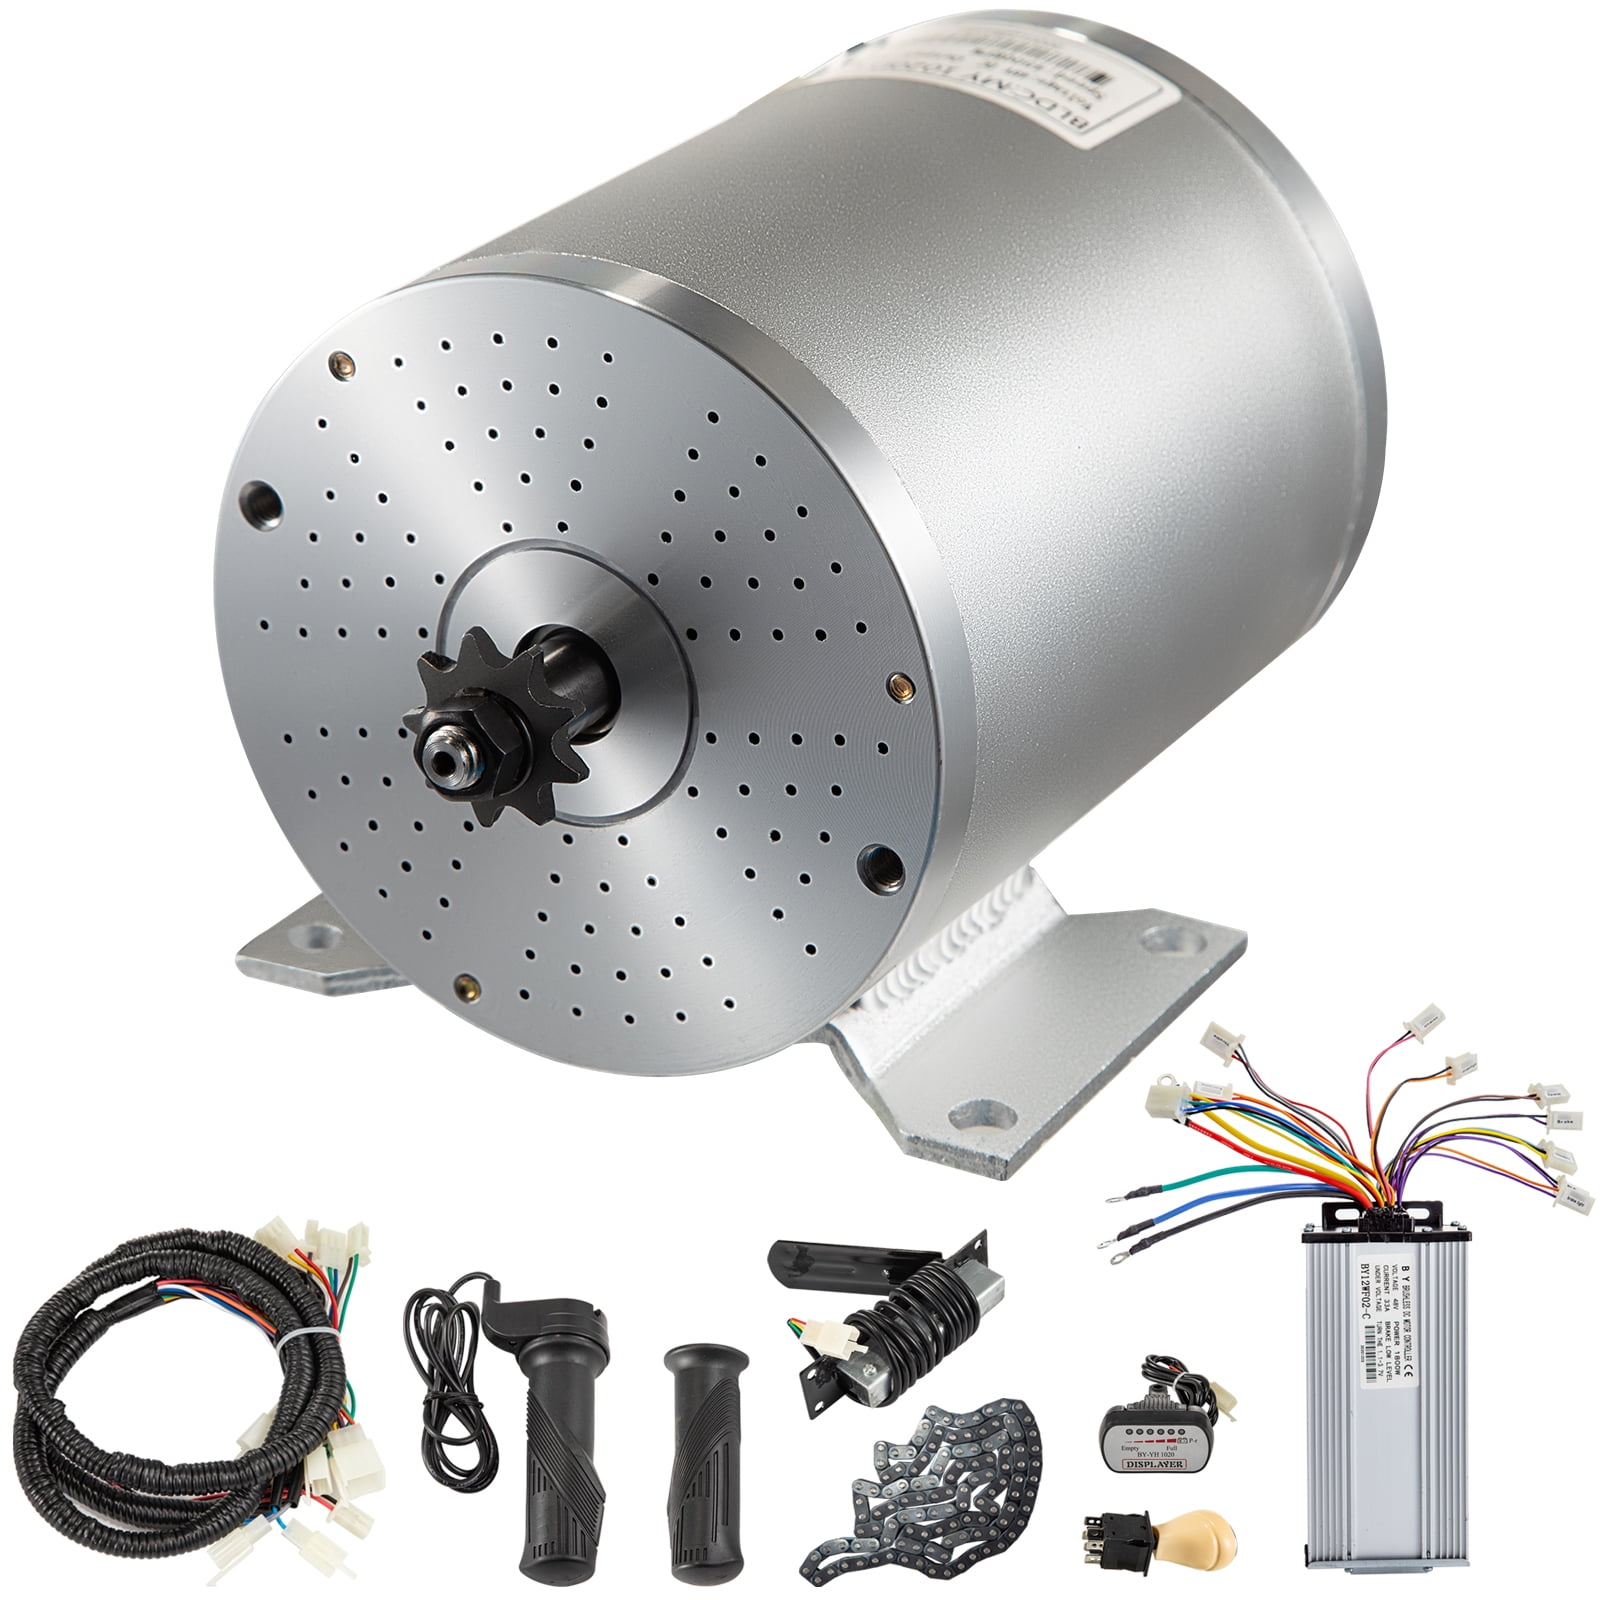 VEVOR Electric Brushless DC Motor,72V 3000W Brushless Electric Motor,4900RPM Brushless Motor Kit,w/Controller and Throttle Grip for Electric Scooter E Bike Engine Motorcycle DIY Part Conversion Kit